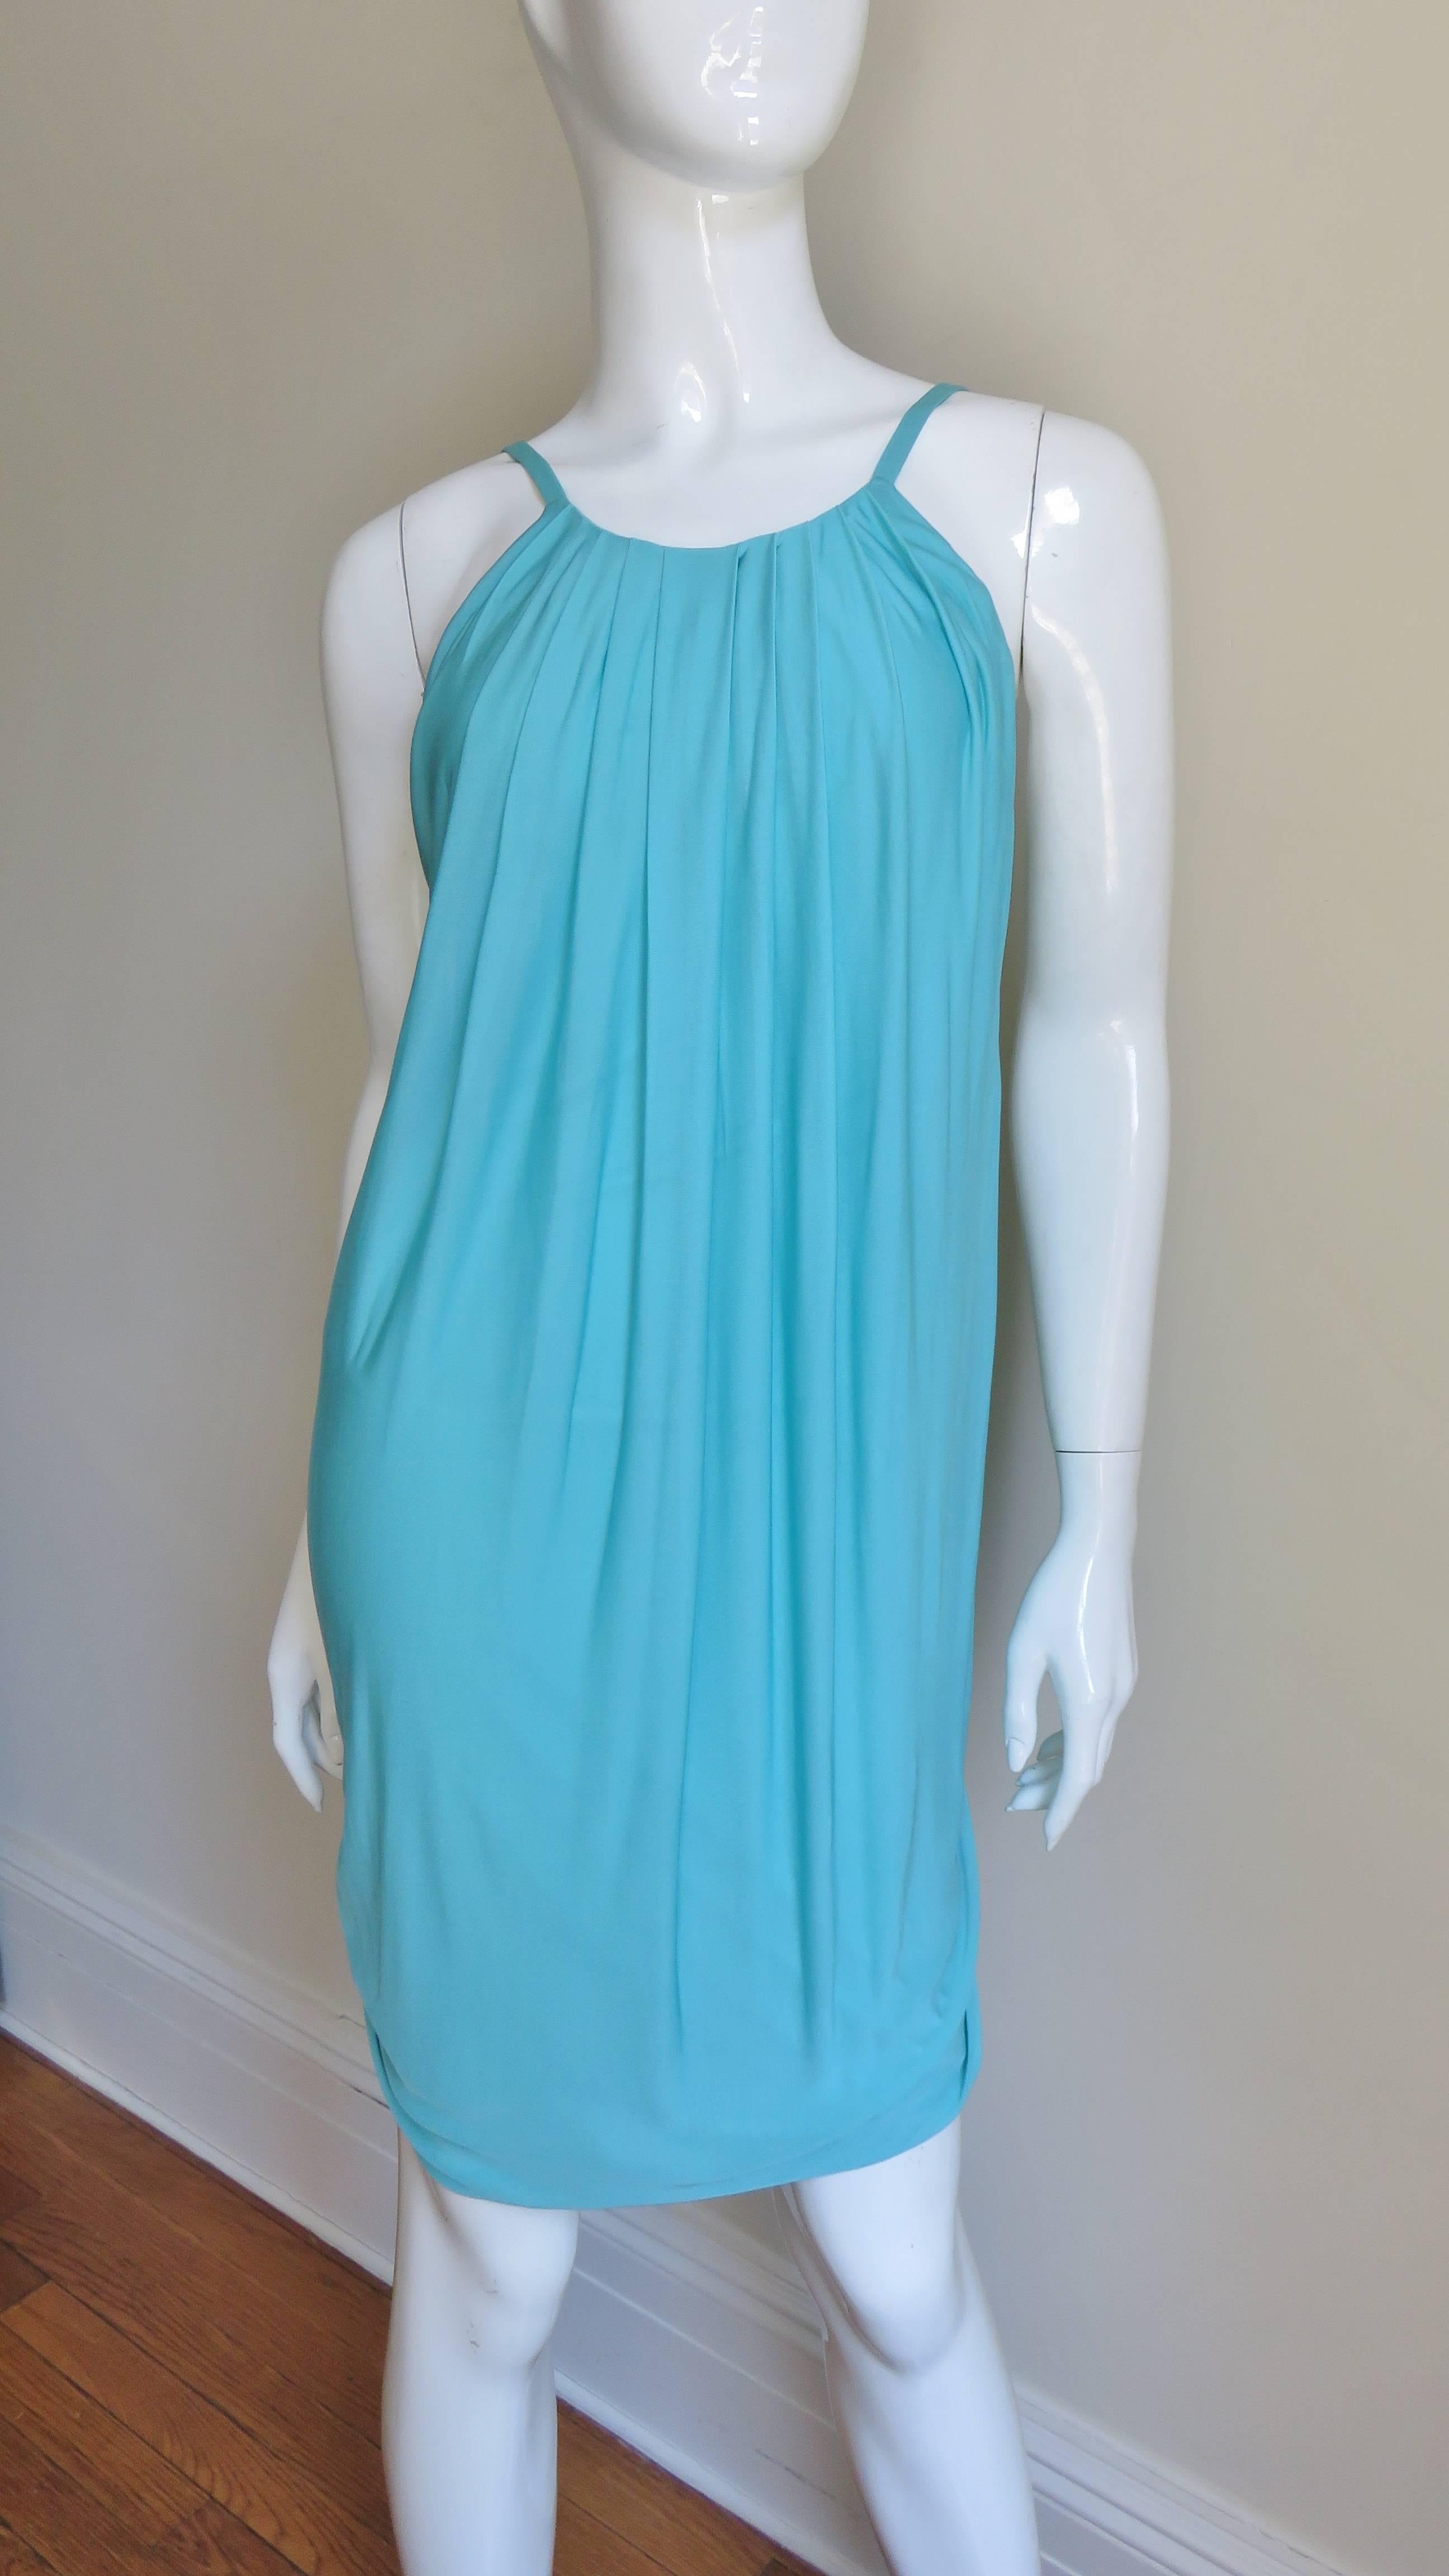 A very sexy dress in aqua silk knit. An easy breezy summer dress that just slips on but creates drama with the back cutout to just above the derriere.  It has spaghetti straps from which tucked fabric falls creating a slight bubble effect.  It